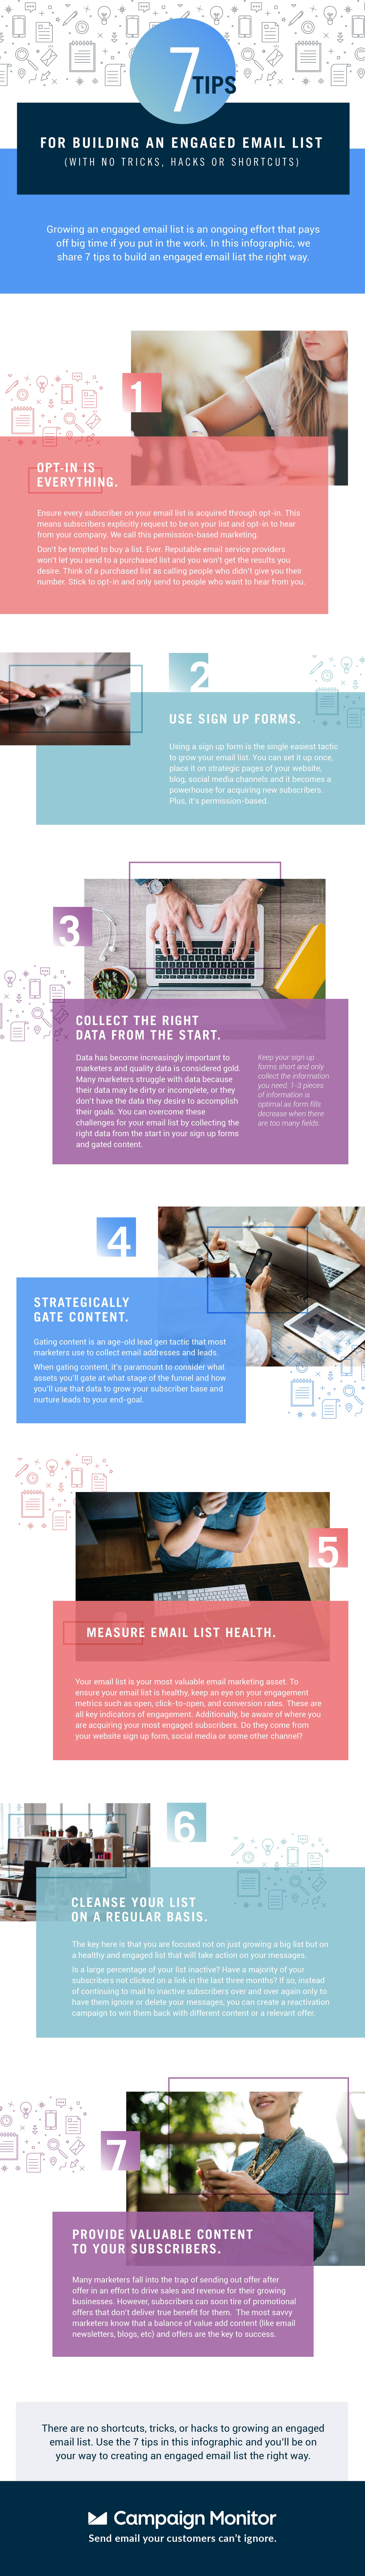 7 Email List Tips infographic